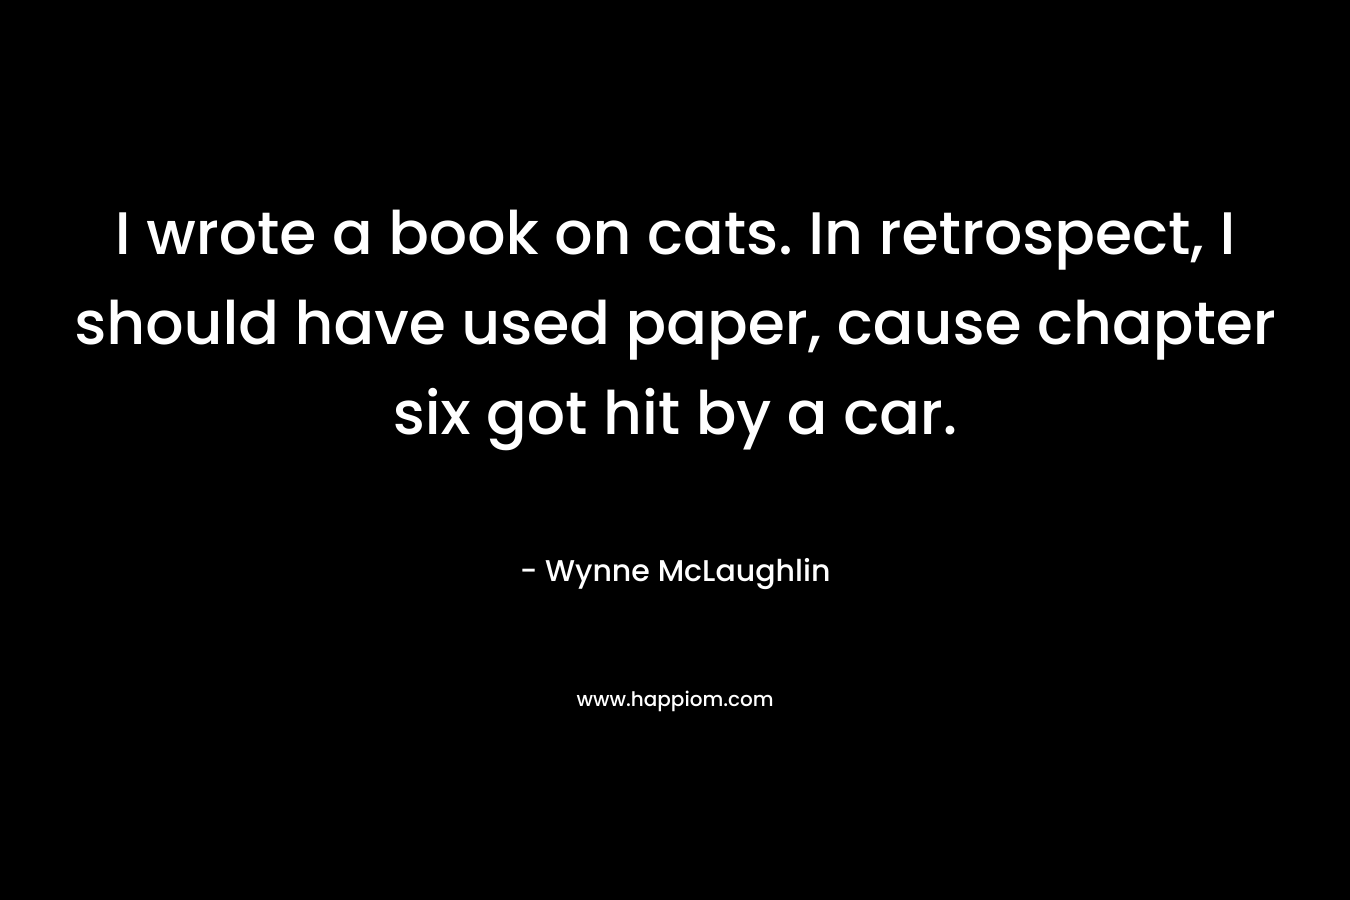 I wrote a book on cats. In retrospect, I should have used paper, cause chapter six got hit by a car.